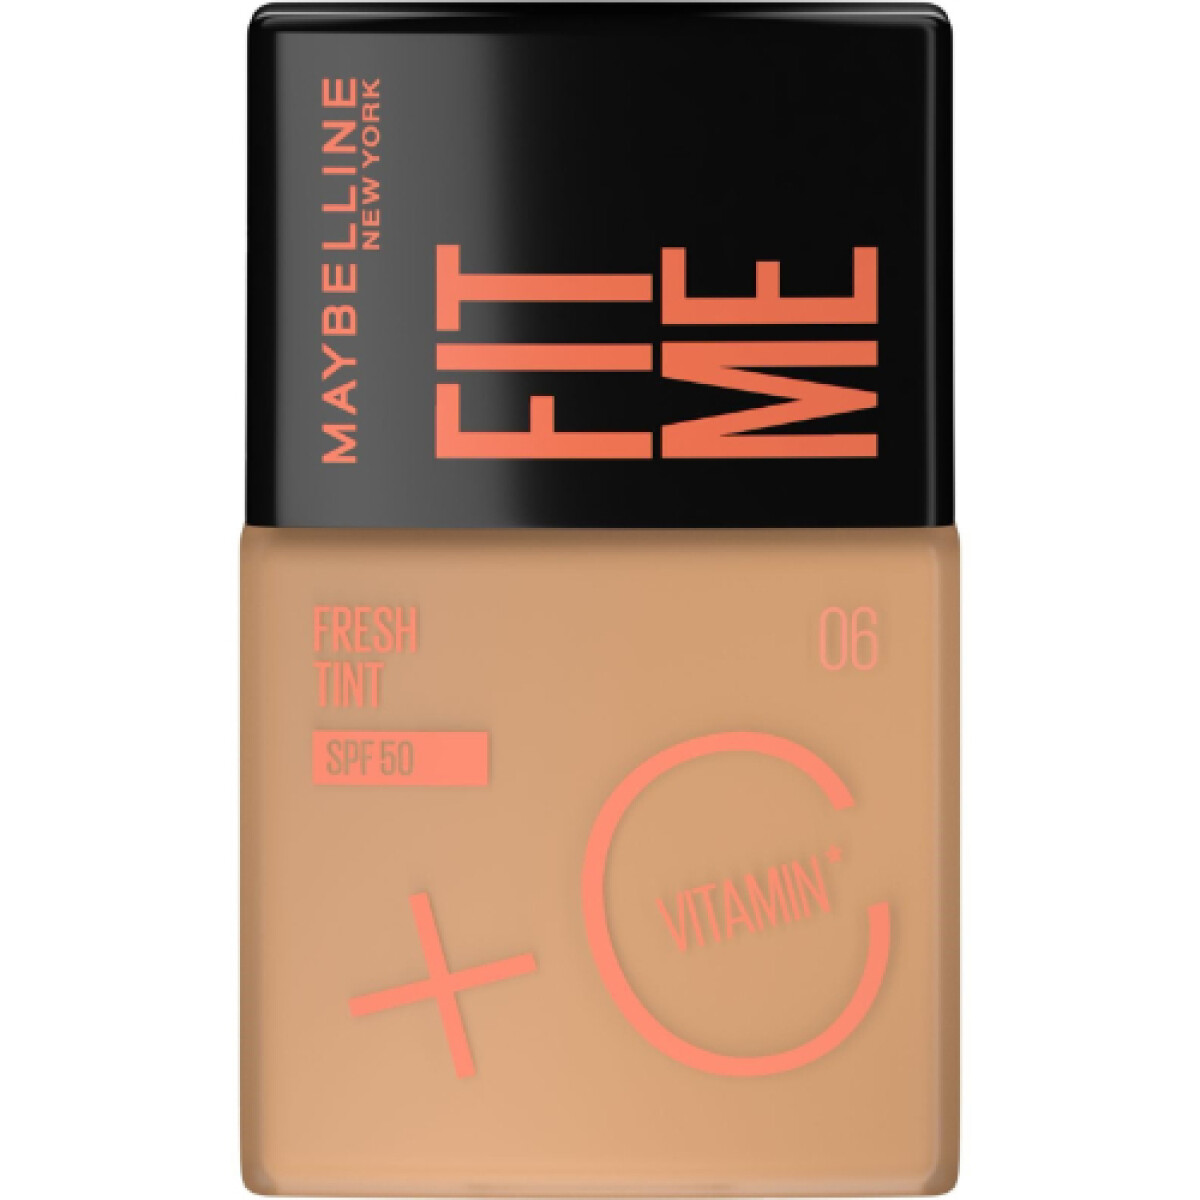 Base Maybelline Fit Me Fresh Tint SPF50 - 06 